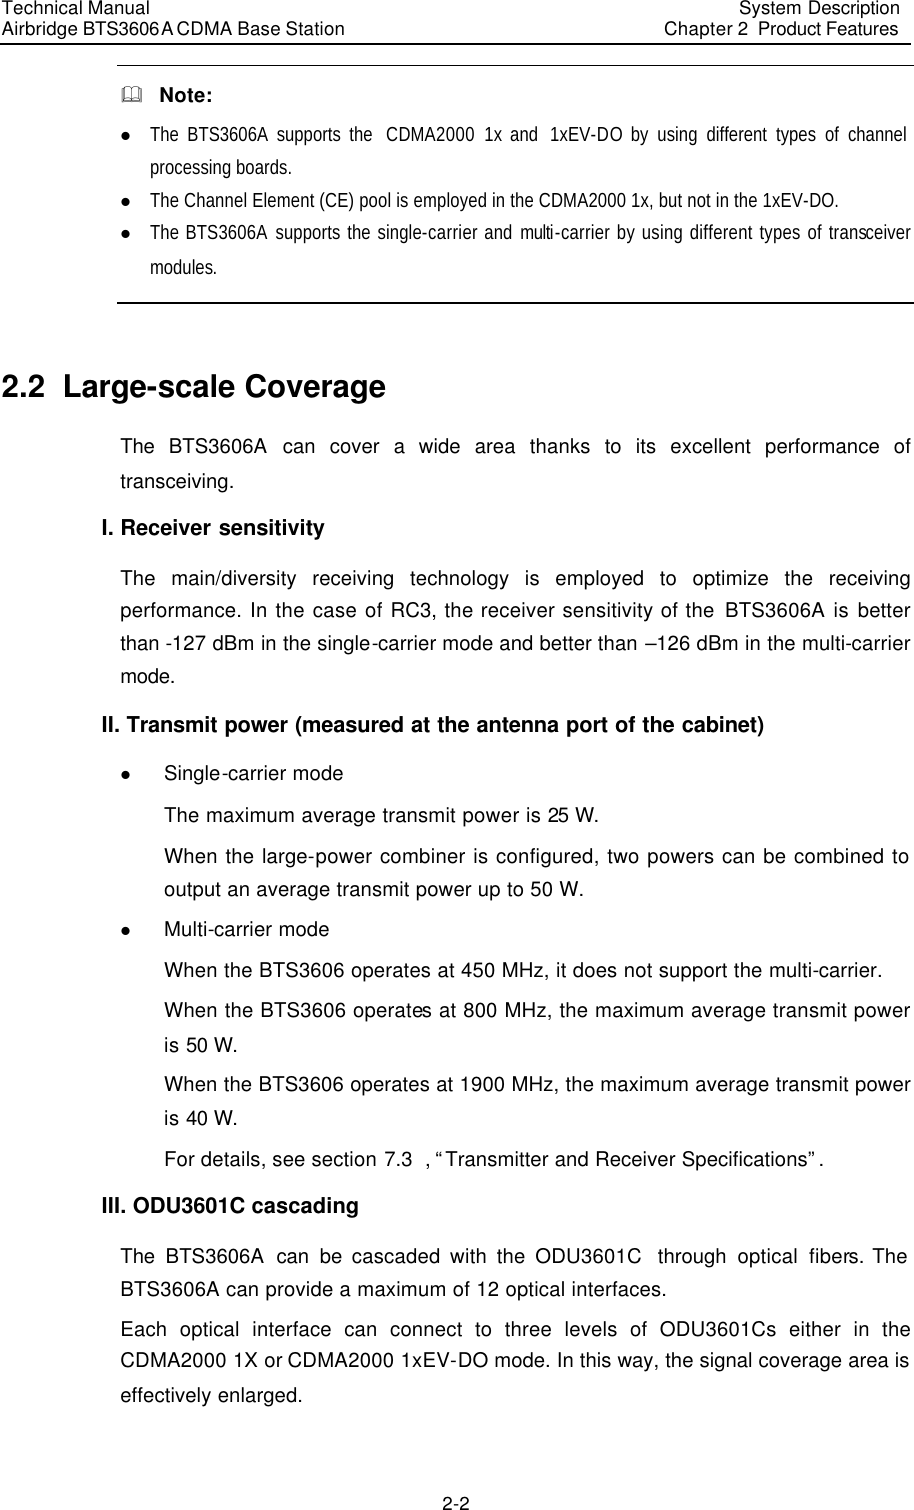 Technical Manual Airbridge BTS3606A CDMA Base Station System Description Chapter 2  Product Features   2-2 &amp;  Note: l The BTS3606A supports the  CDMA2000 1x and  1xEV-DO by using different types of channel processing boards. l The Channel Element (CE) pool is employed in the CDMA2000 1x, but not in the 1xEV-DO. l The BTS3606A supports the single-carrier and  multi-carrier by using different types of transceiver modules.  2.2  Large-scale Coverage The  BTS3606A can cover a  wide area thanks to its excellent performance of transceiving. I. Receiver sensitivity The main/diversity receiving technology is employed to optimize the receiving performance. In the case of RC3, the receiver sensitivity of the BTS3606A is better than -127 dBm in the single-carrier mode and better than –126 dBm in the multi-carrier mode. II. Transmit power (measured at the antenna port of the cabinet) l Single-carrier mode The maximum average transmit power is 25 W. When the large-power combiner is configured, two powers can be combined to output an average transmit power up to 50 W. l Multi-carrier mode When the BTS3606 operates at 450 MHz, it does not support the multi-carrier.  When the BTS3606 operates at 800 MHz, the maximum average transmit power is 50 W. When the BTS3606 operates at 1900 MHz, the maximum average transmit power is 40 W. For details, see section 7.3  , “Transmitter and Receiver Specifications”. III. ODU3601C cascading The  BTS3606A can be cascaded with the ODU3601C  through optical fibers. The BTS3606A can provide a maximum of 12 optical interfaces. Each optical interface can connect to three levels of ODU3601Cs either in the CDMA2000 1X or CDMA2000 1xEV-DO mode. In this way, the signal coverage area is effectively enlarged. 